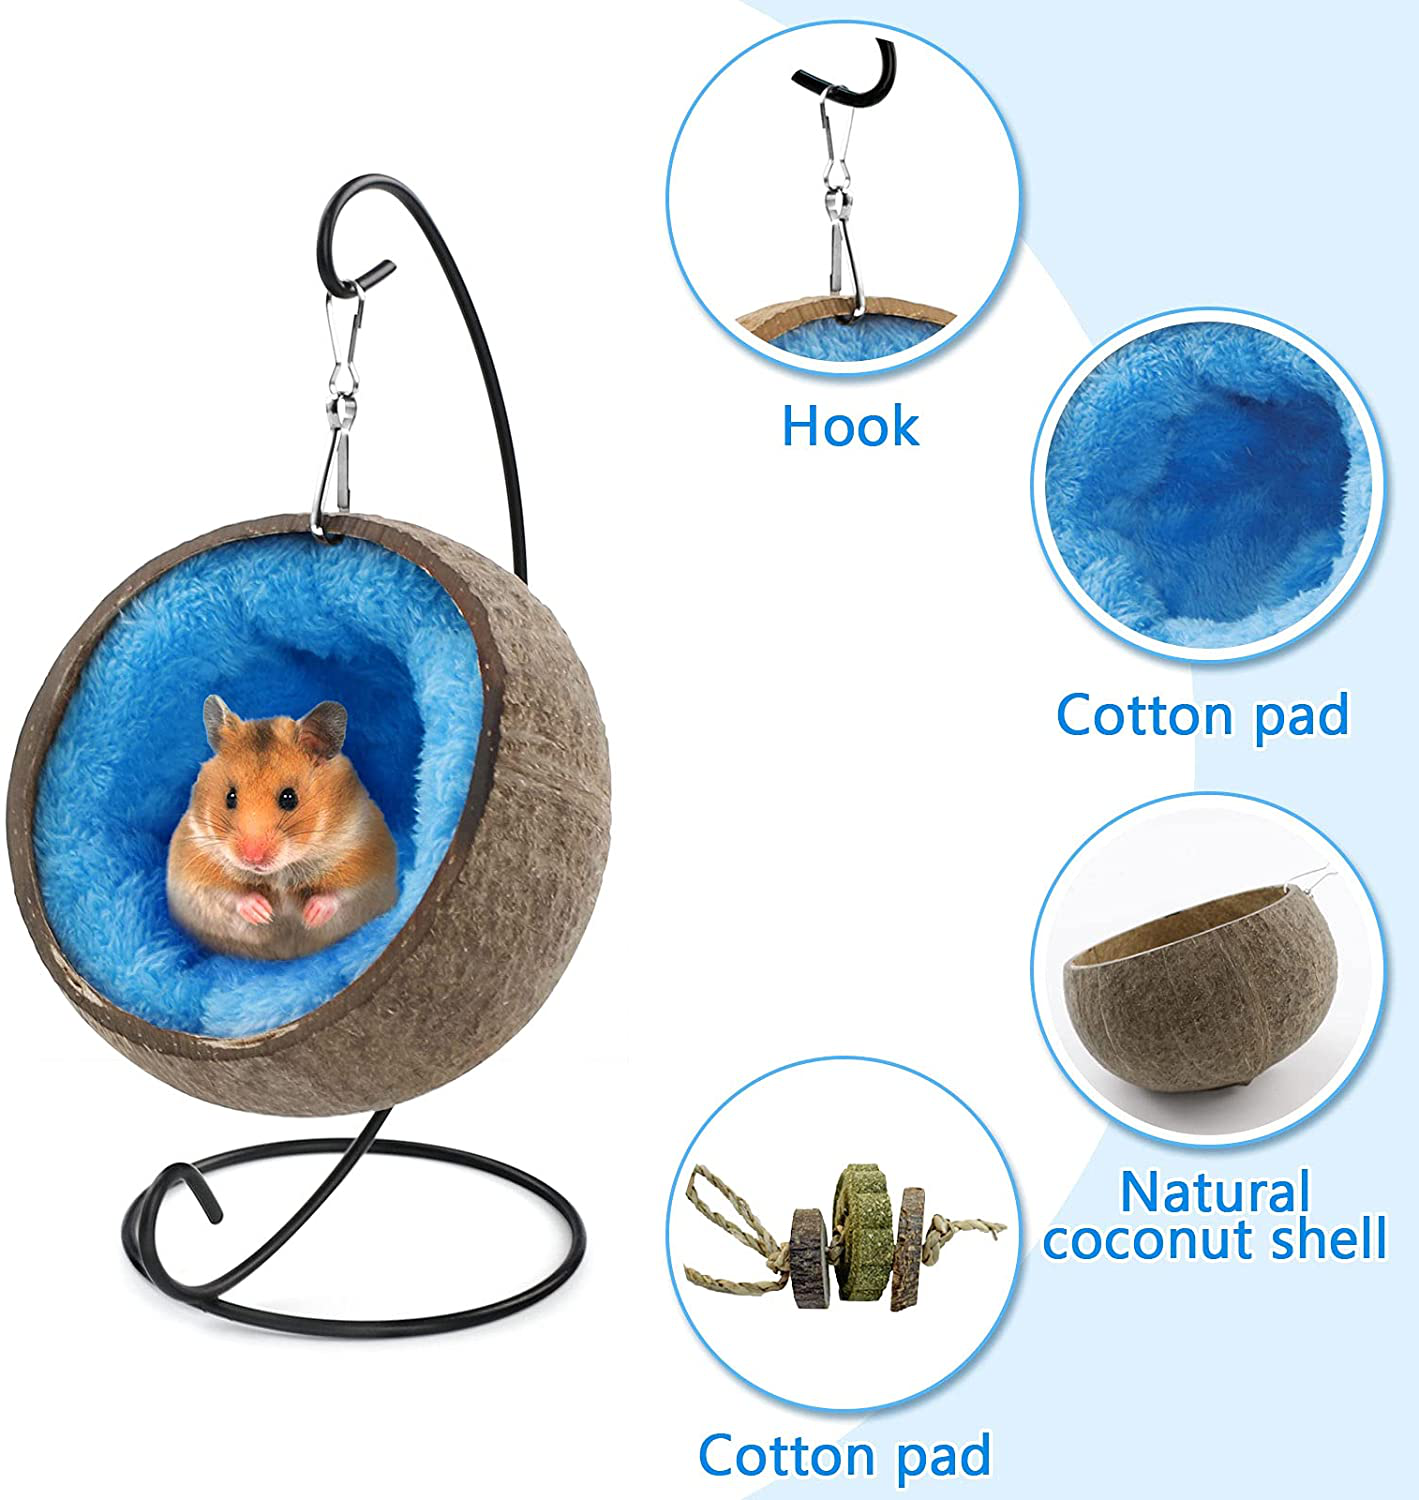 Ranslen Natural Coconut Hamster Hideout Hammock with Molar Toy,Suspension Coconut Husk Hamster Bed House with Warm Pad,Small Animal Habitat Decor Accessories Hanging Loop (Brown)